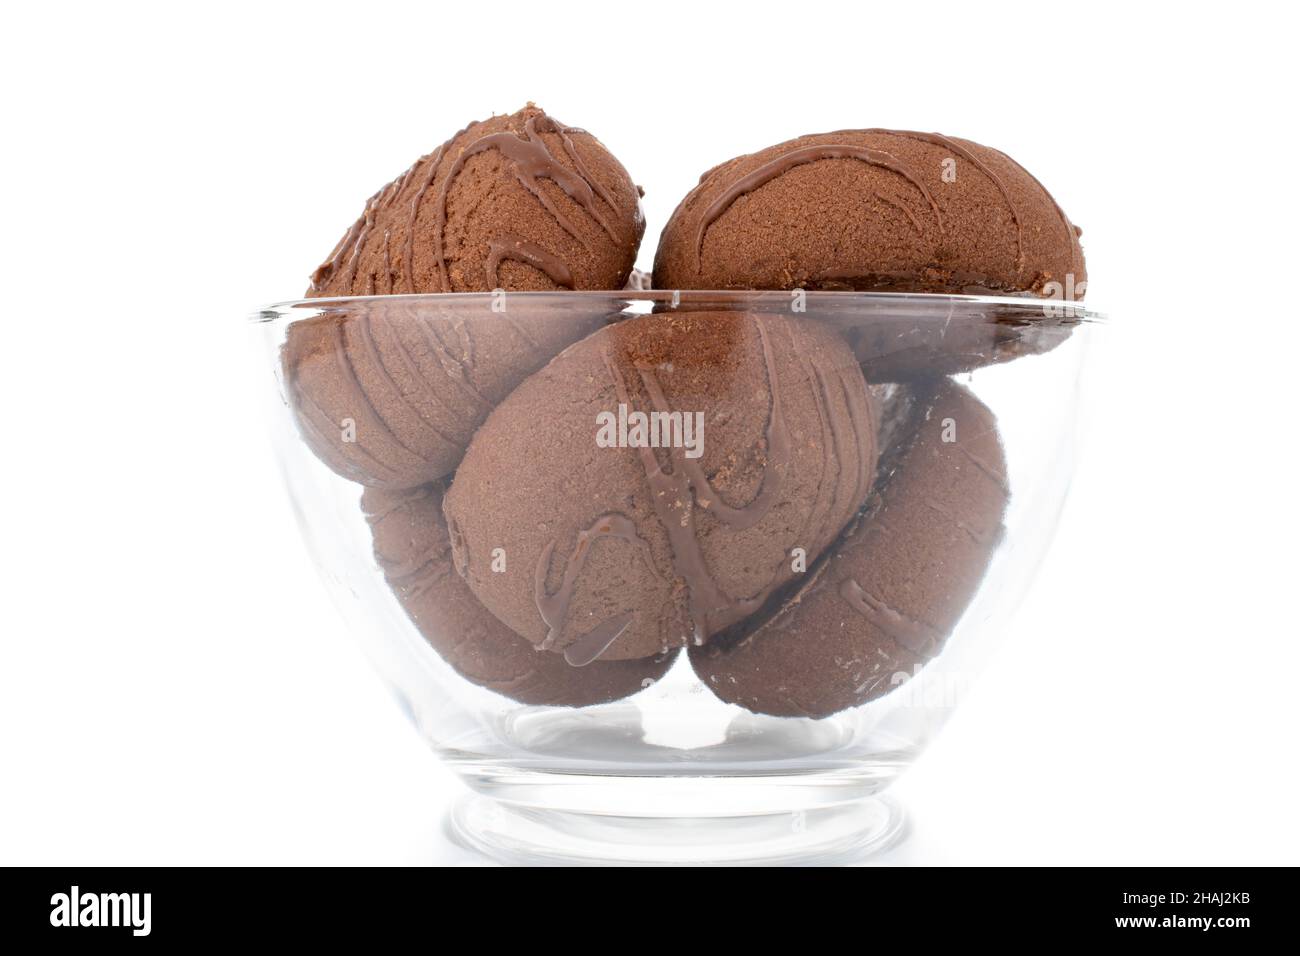 Several sweet chocolate cookies in a glass dish, close-up, isolated on white. Stock Photo